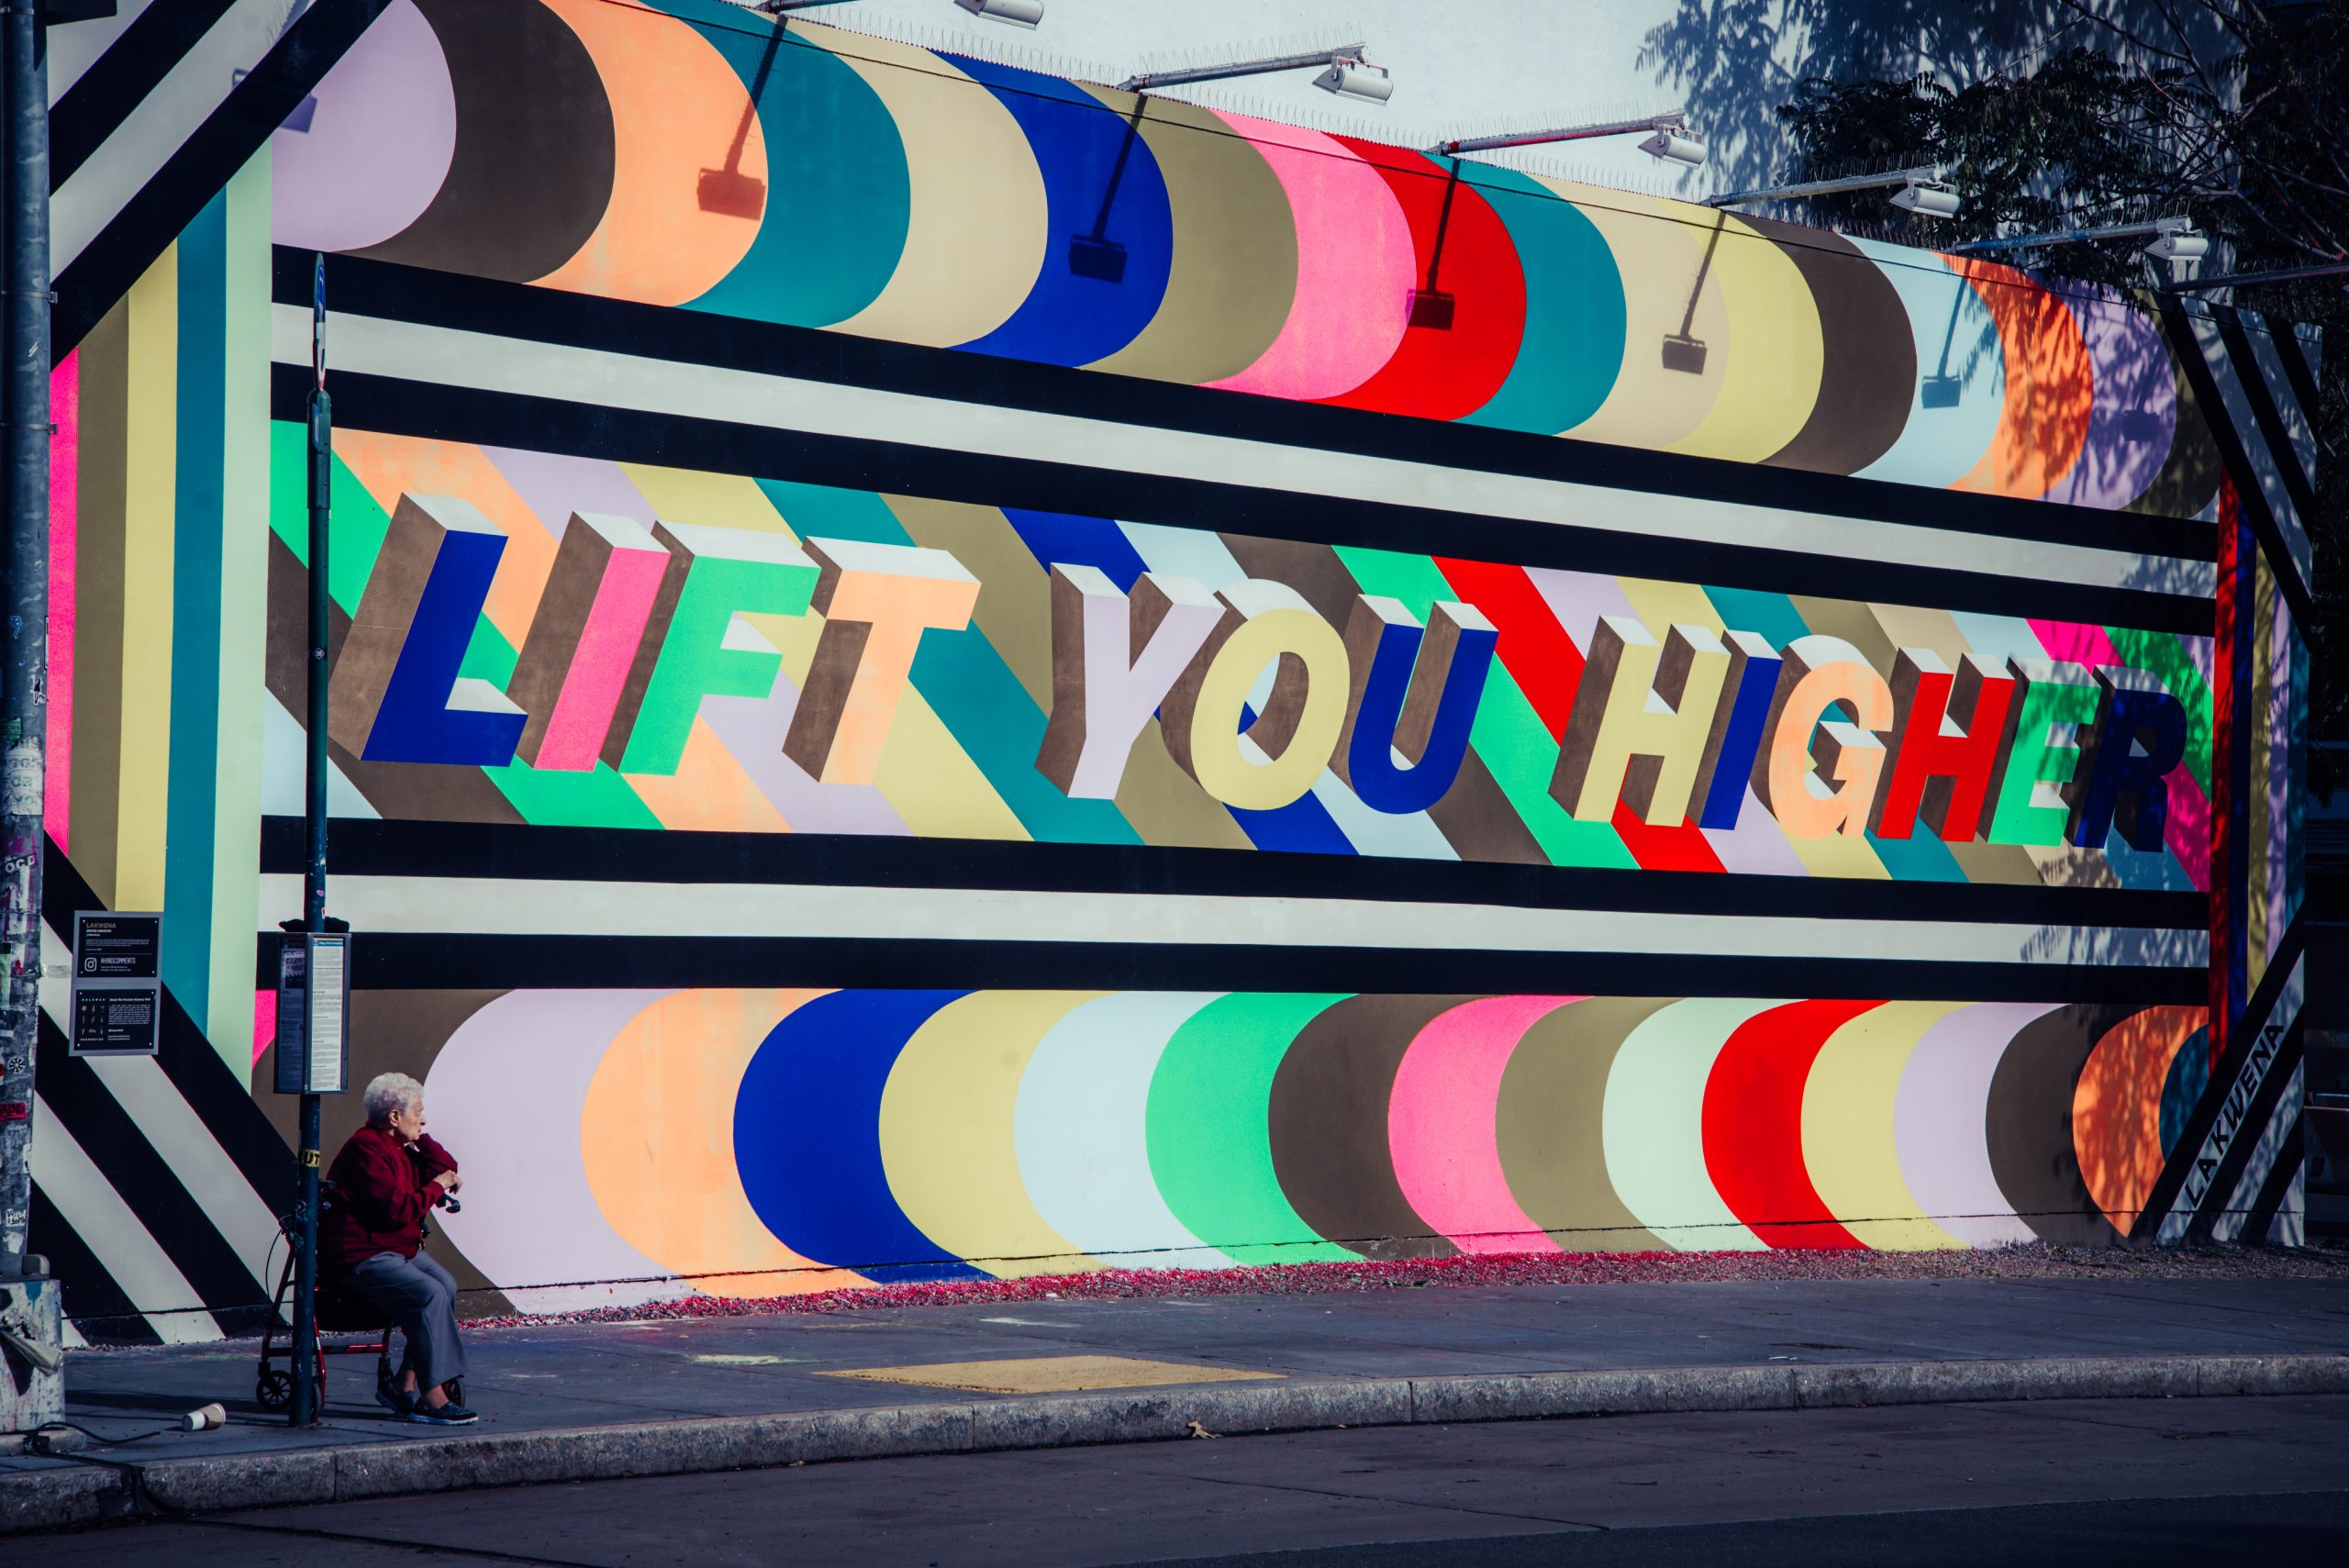 colorful mural that says "Lift You Higher"